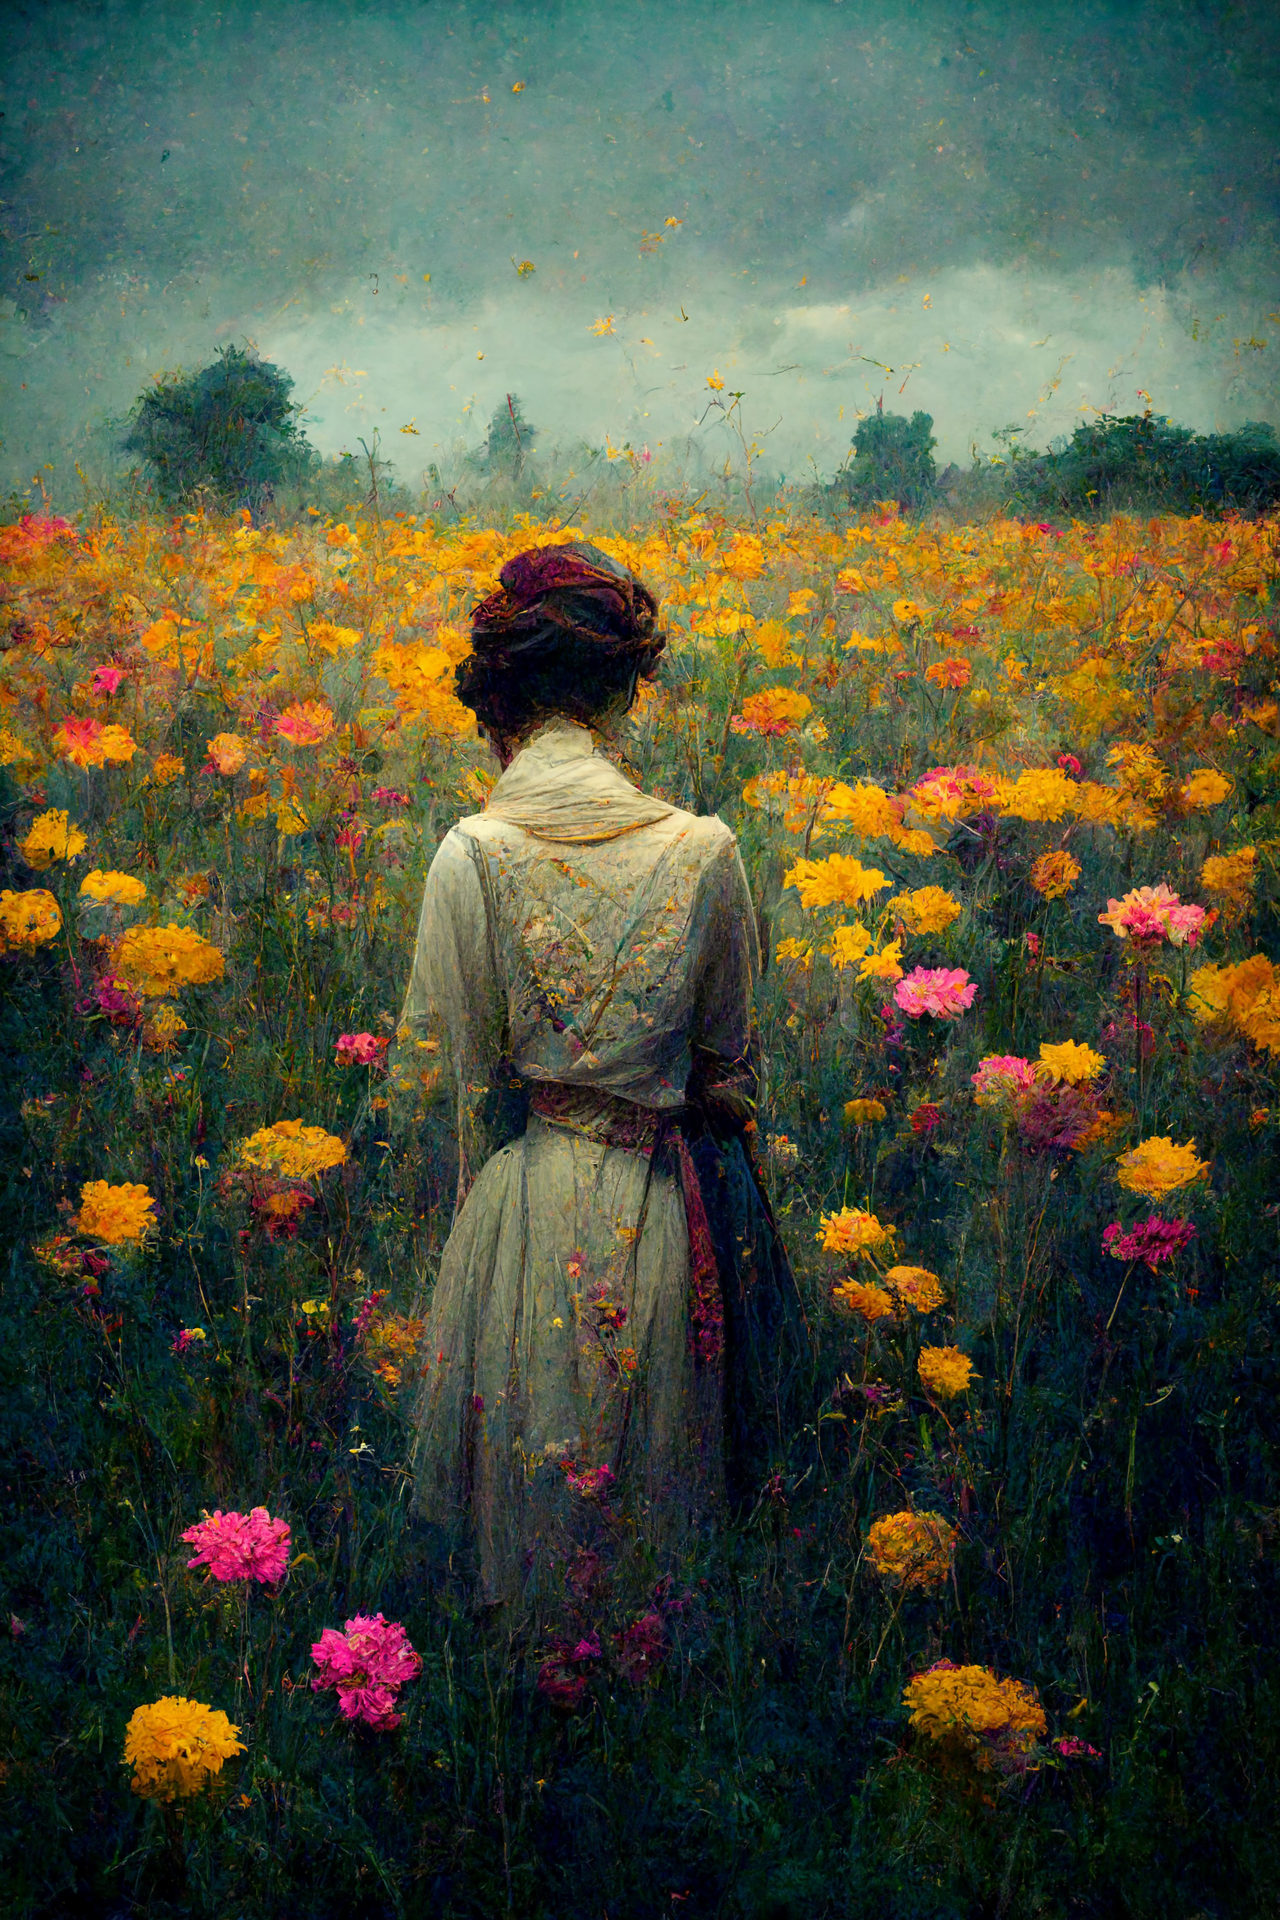 sedetweiler.com_standing_in_a_field_of_flowers_8425caa6-0db6-4163-bb78-281217c5b577.png